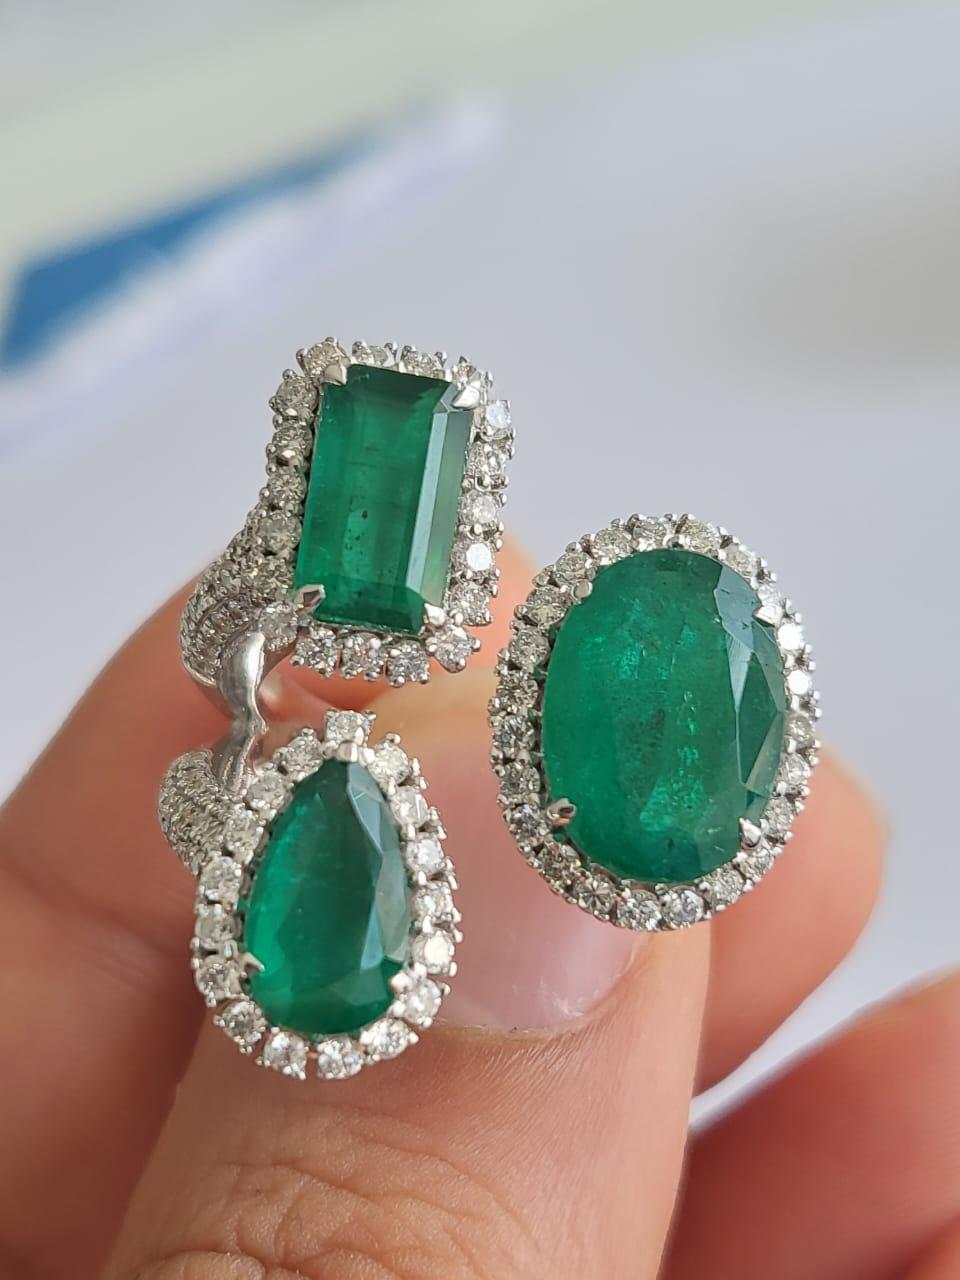 A very beautiful and one of a kind, Emerald Three Stone Cocktail Ring set in 18K White Gold & Diamonds. The weight of the Emeralds is 15.52 carats. The Emeralds are completely natural, without any treatment and are of Zambian origin. The weight of